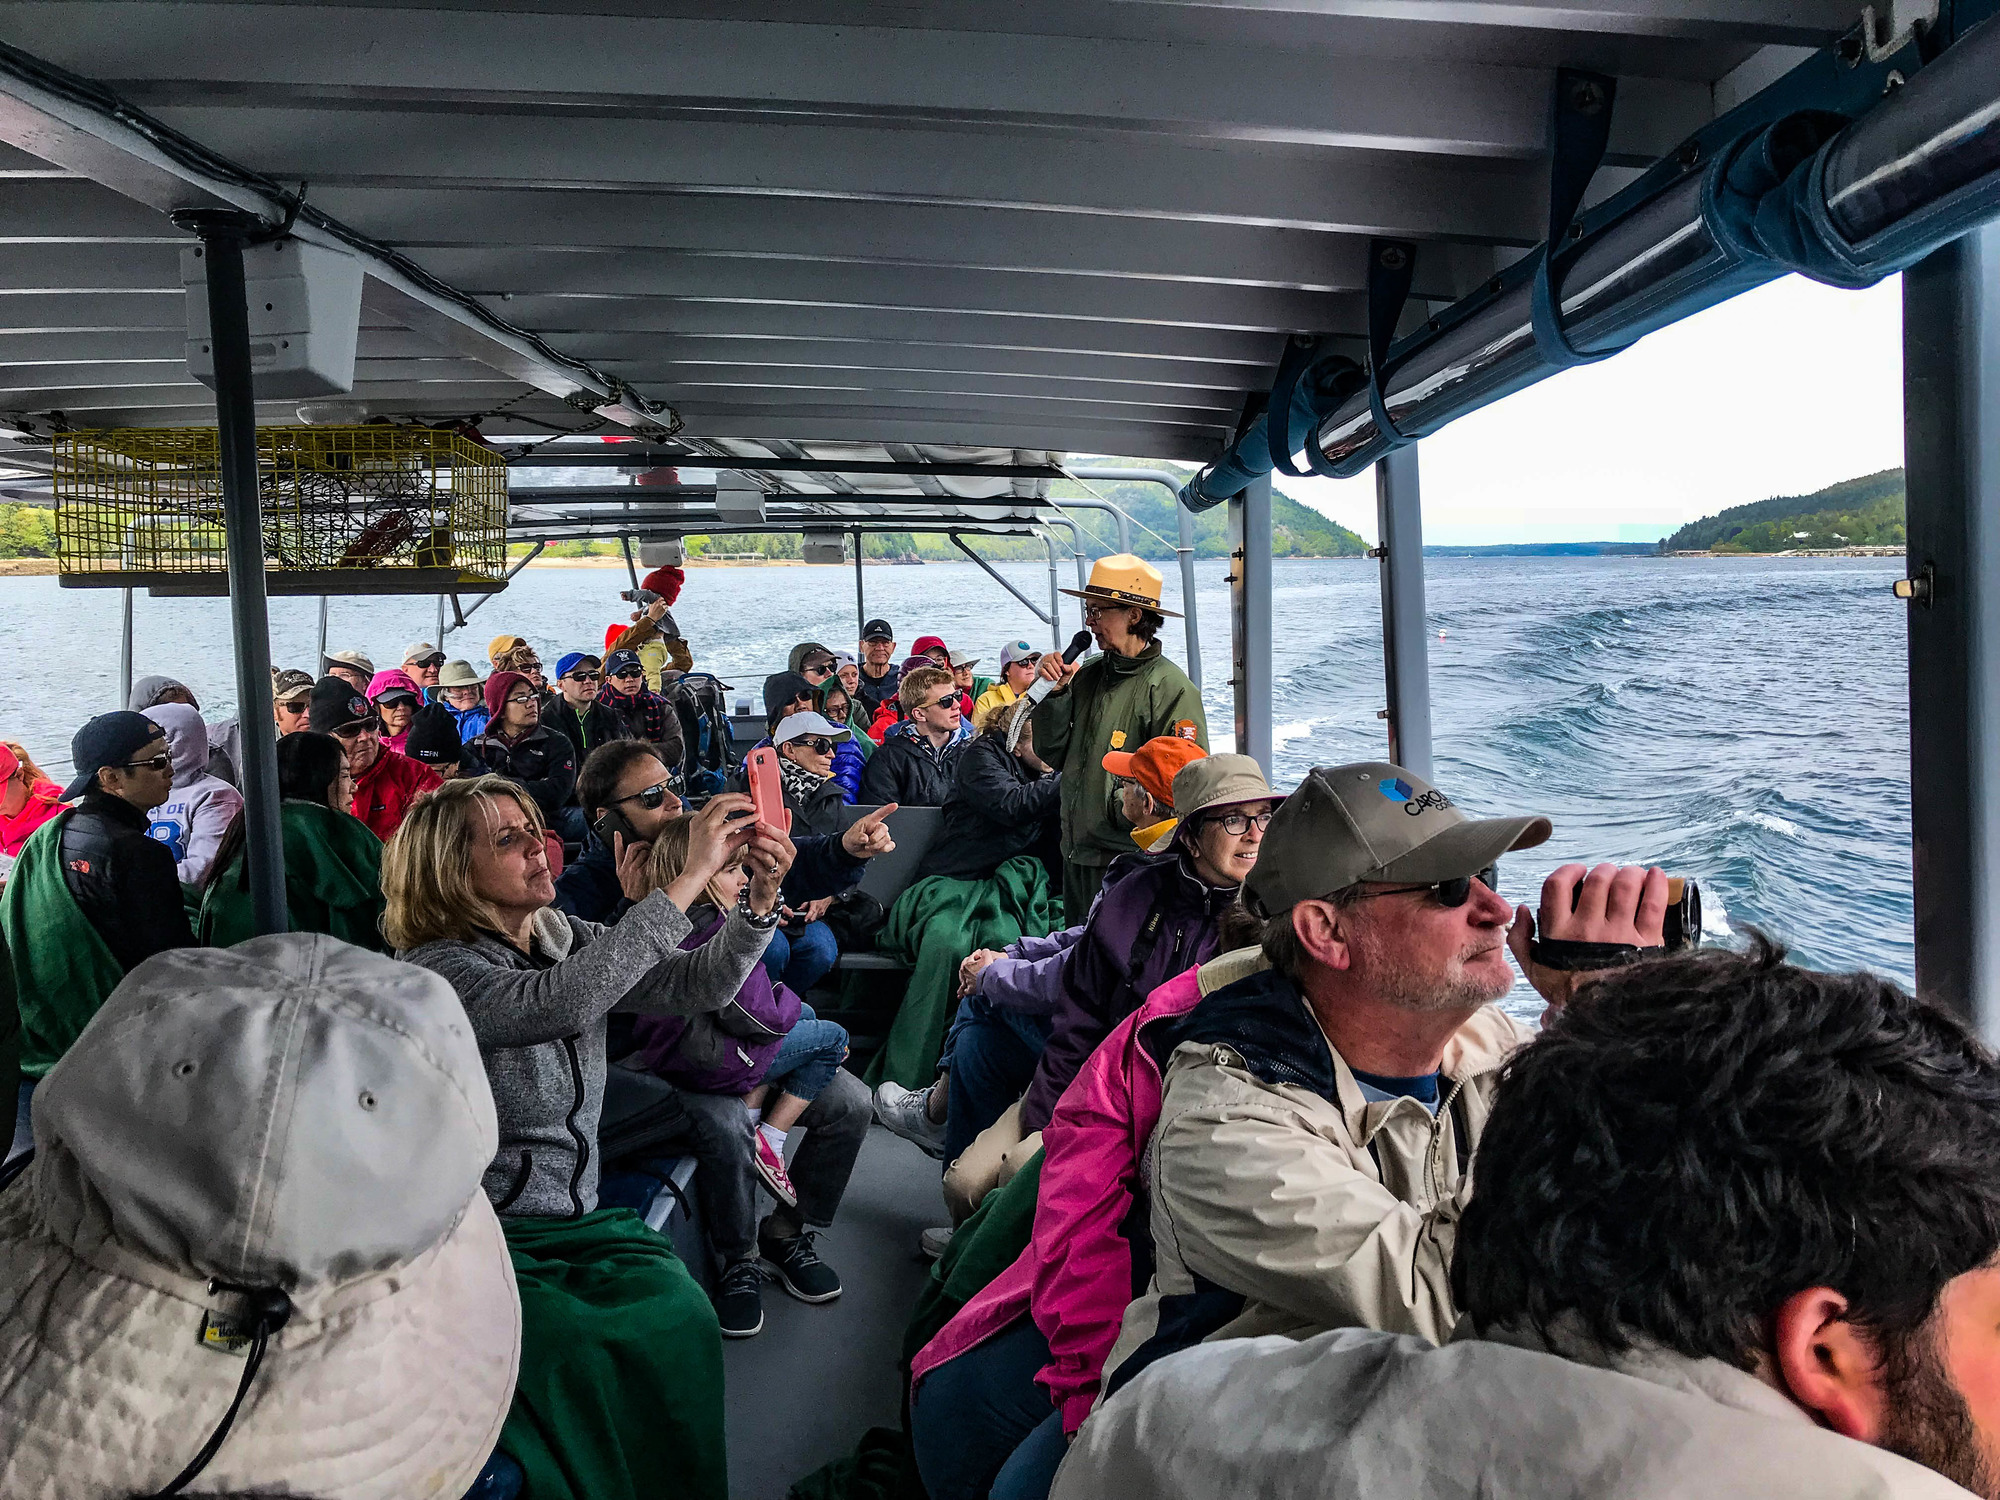 Ranger giving a tour to a large group on a boat